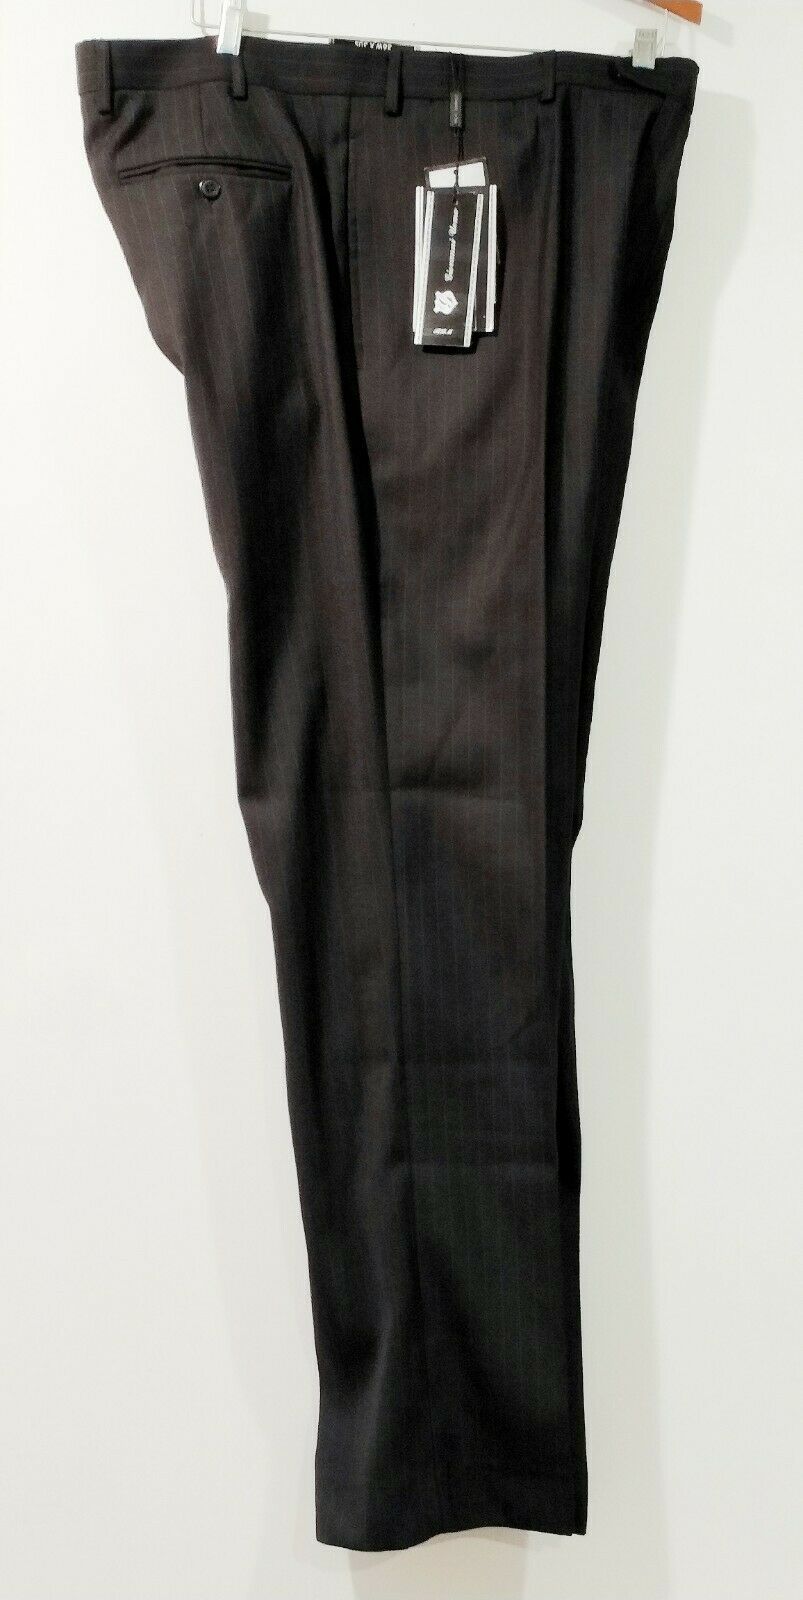 NWT Men Dress Pants by Signature Collection Size 50 inseam 34 Black Color